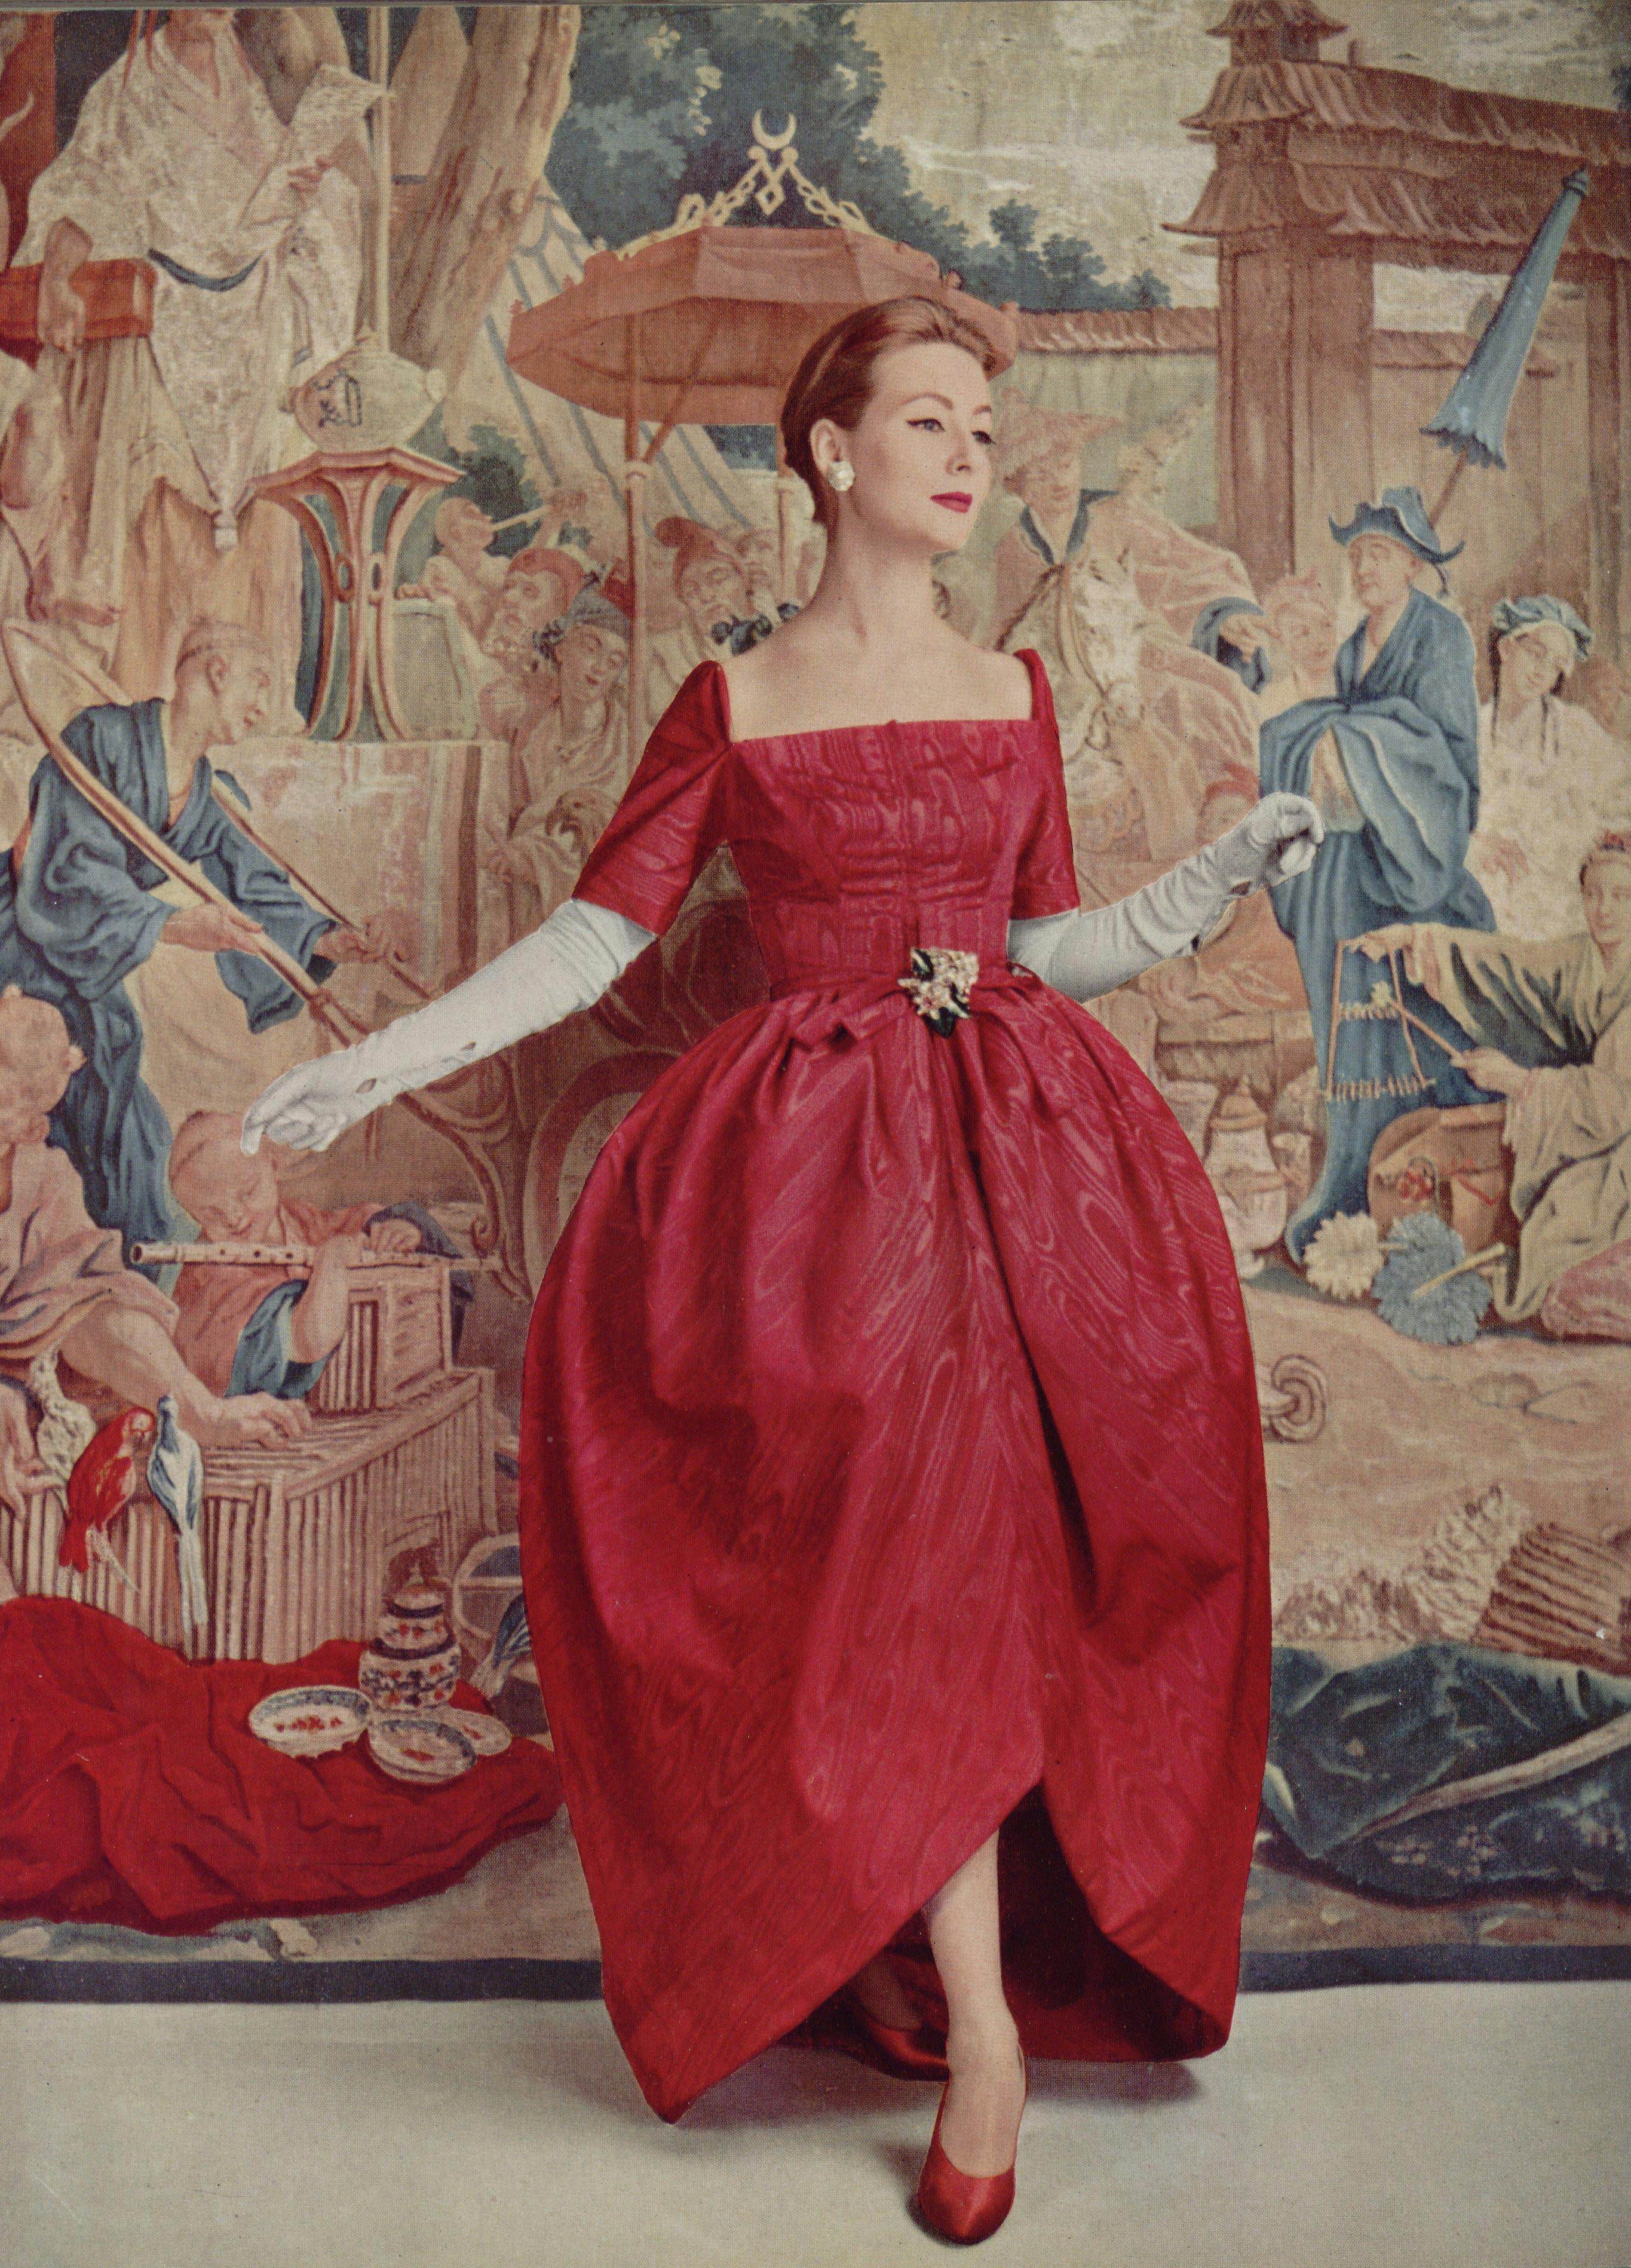 A model in a red dress with a square neckline, red heels and white gloves before a painted background.